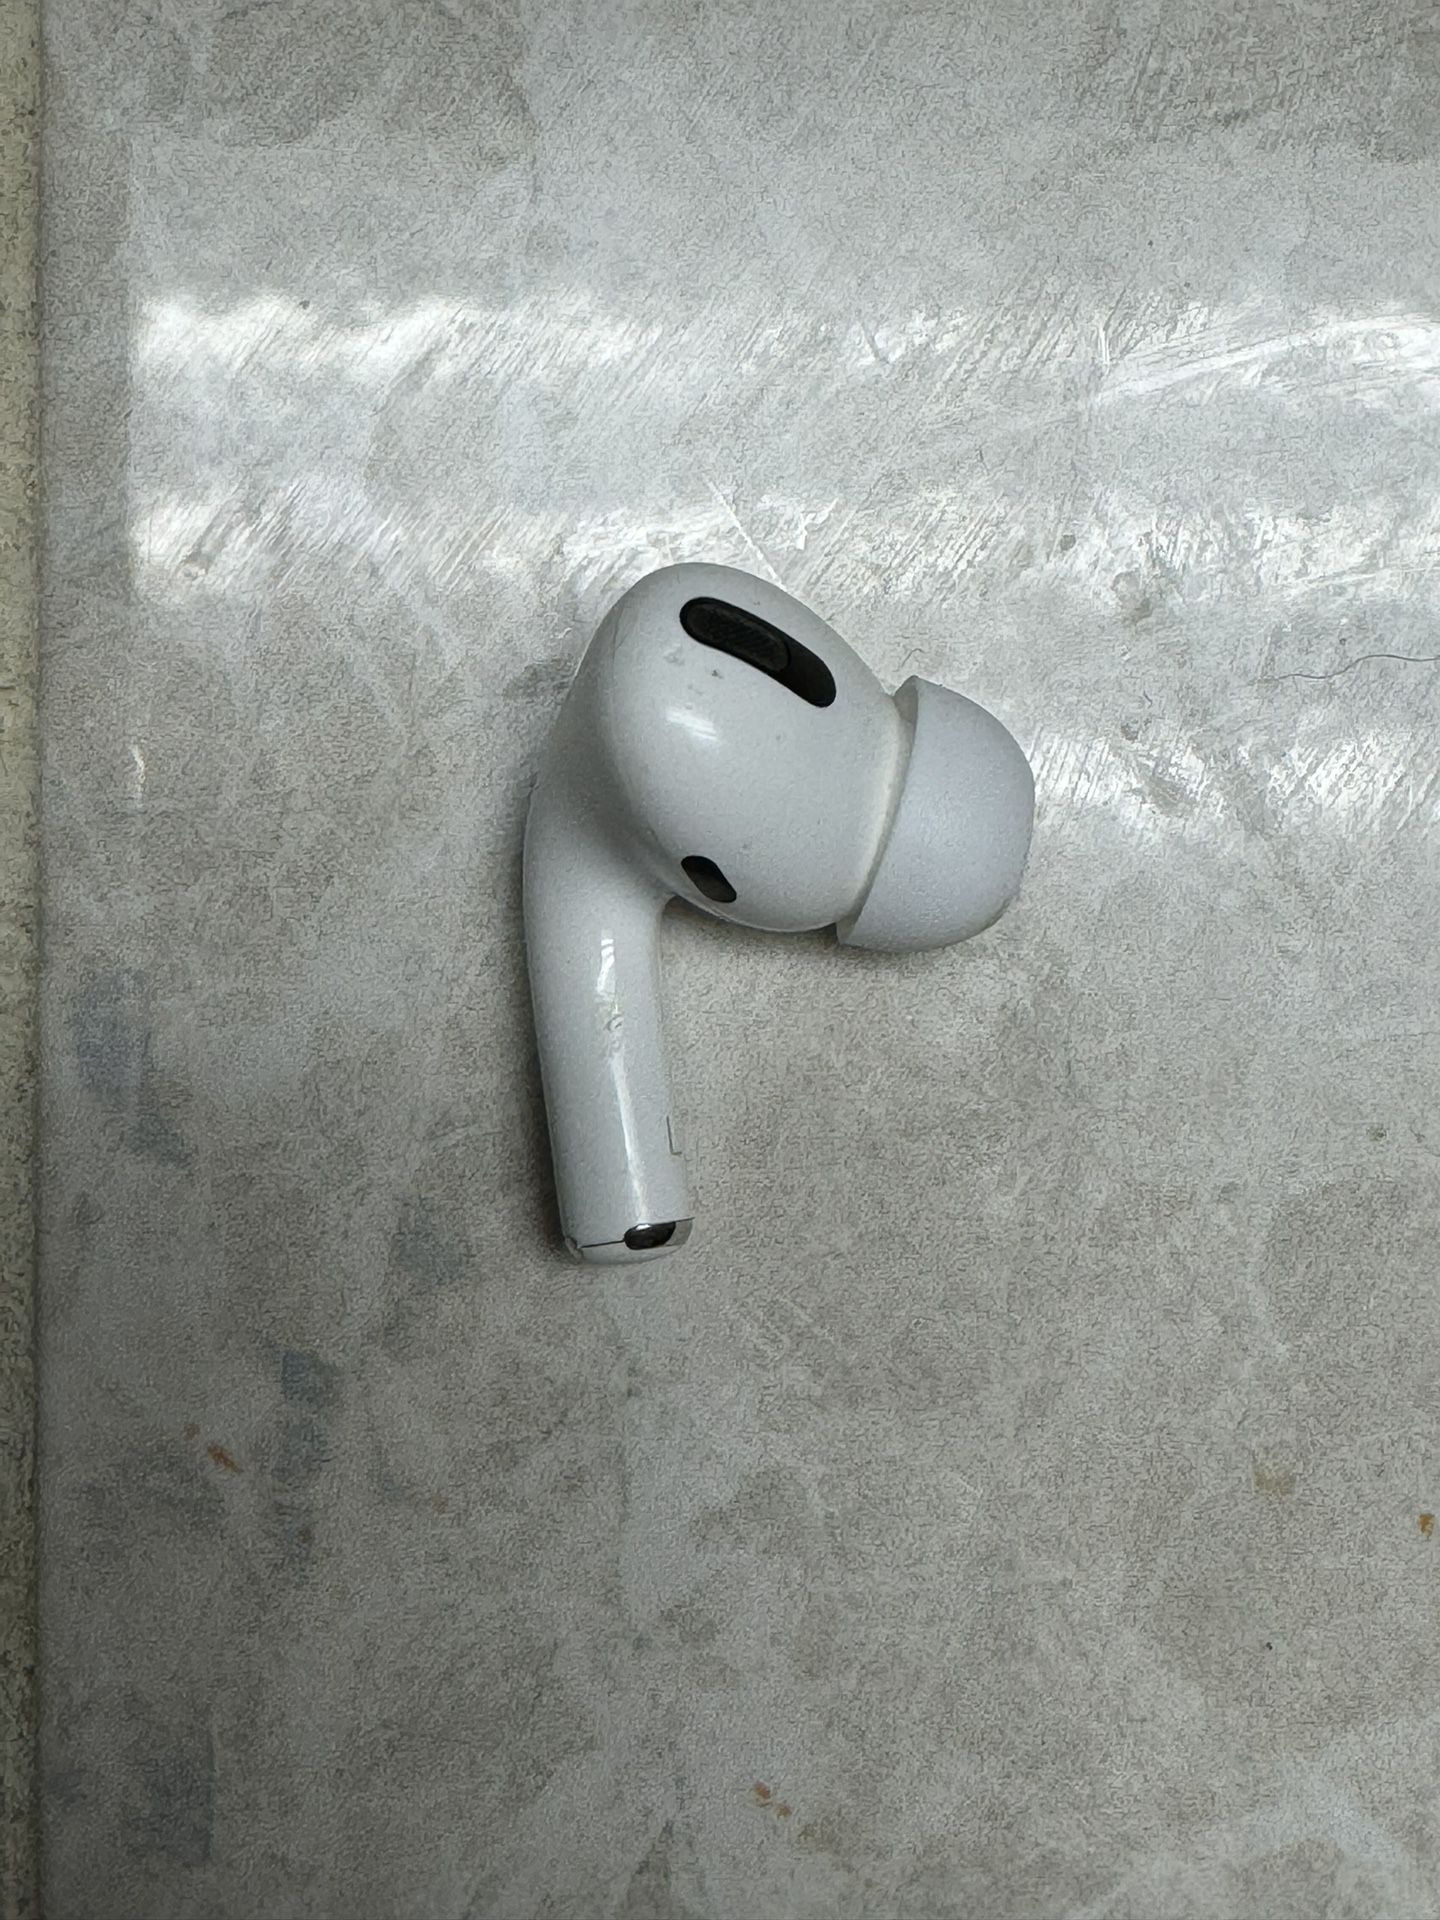 Airpods pro buds